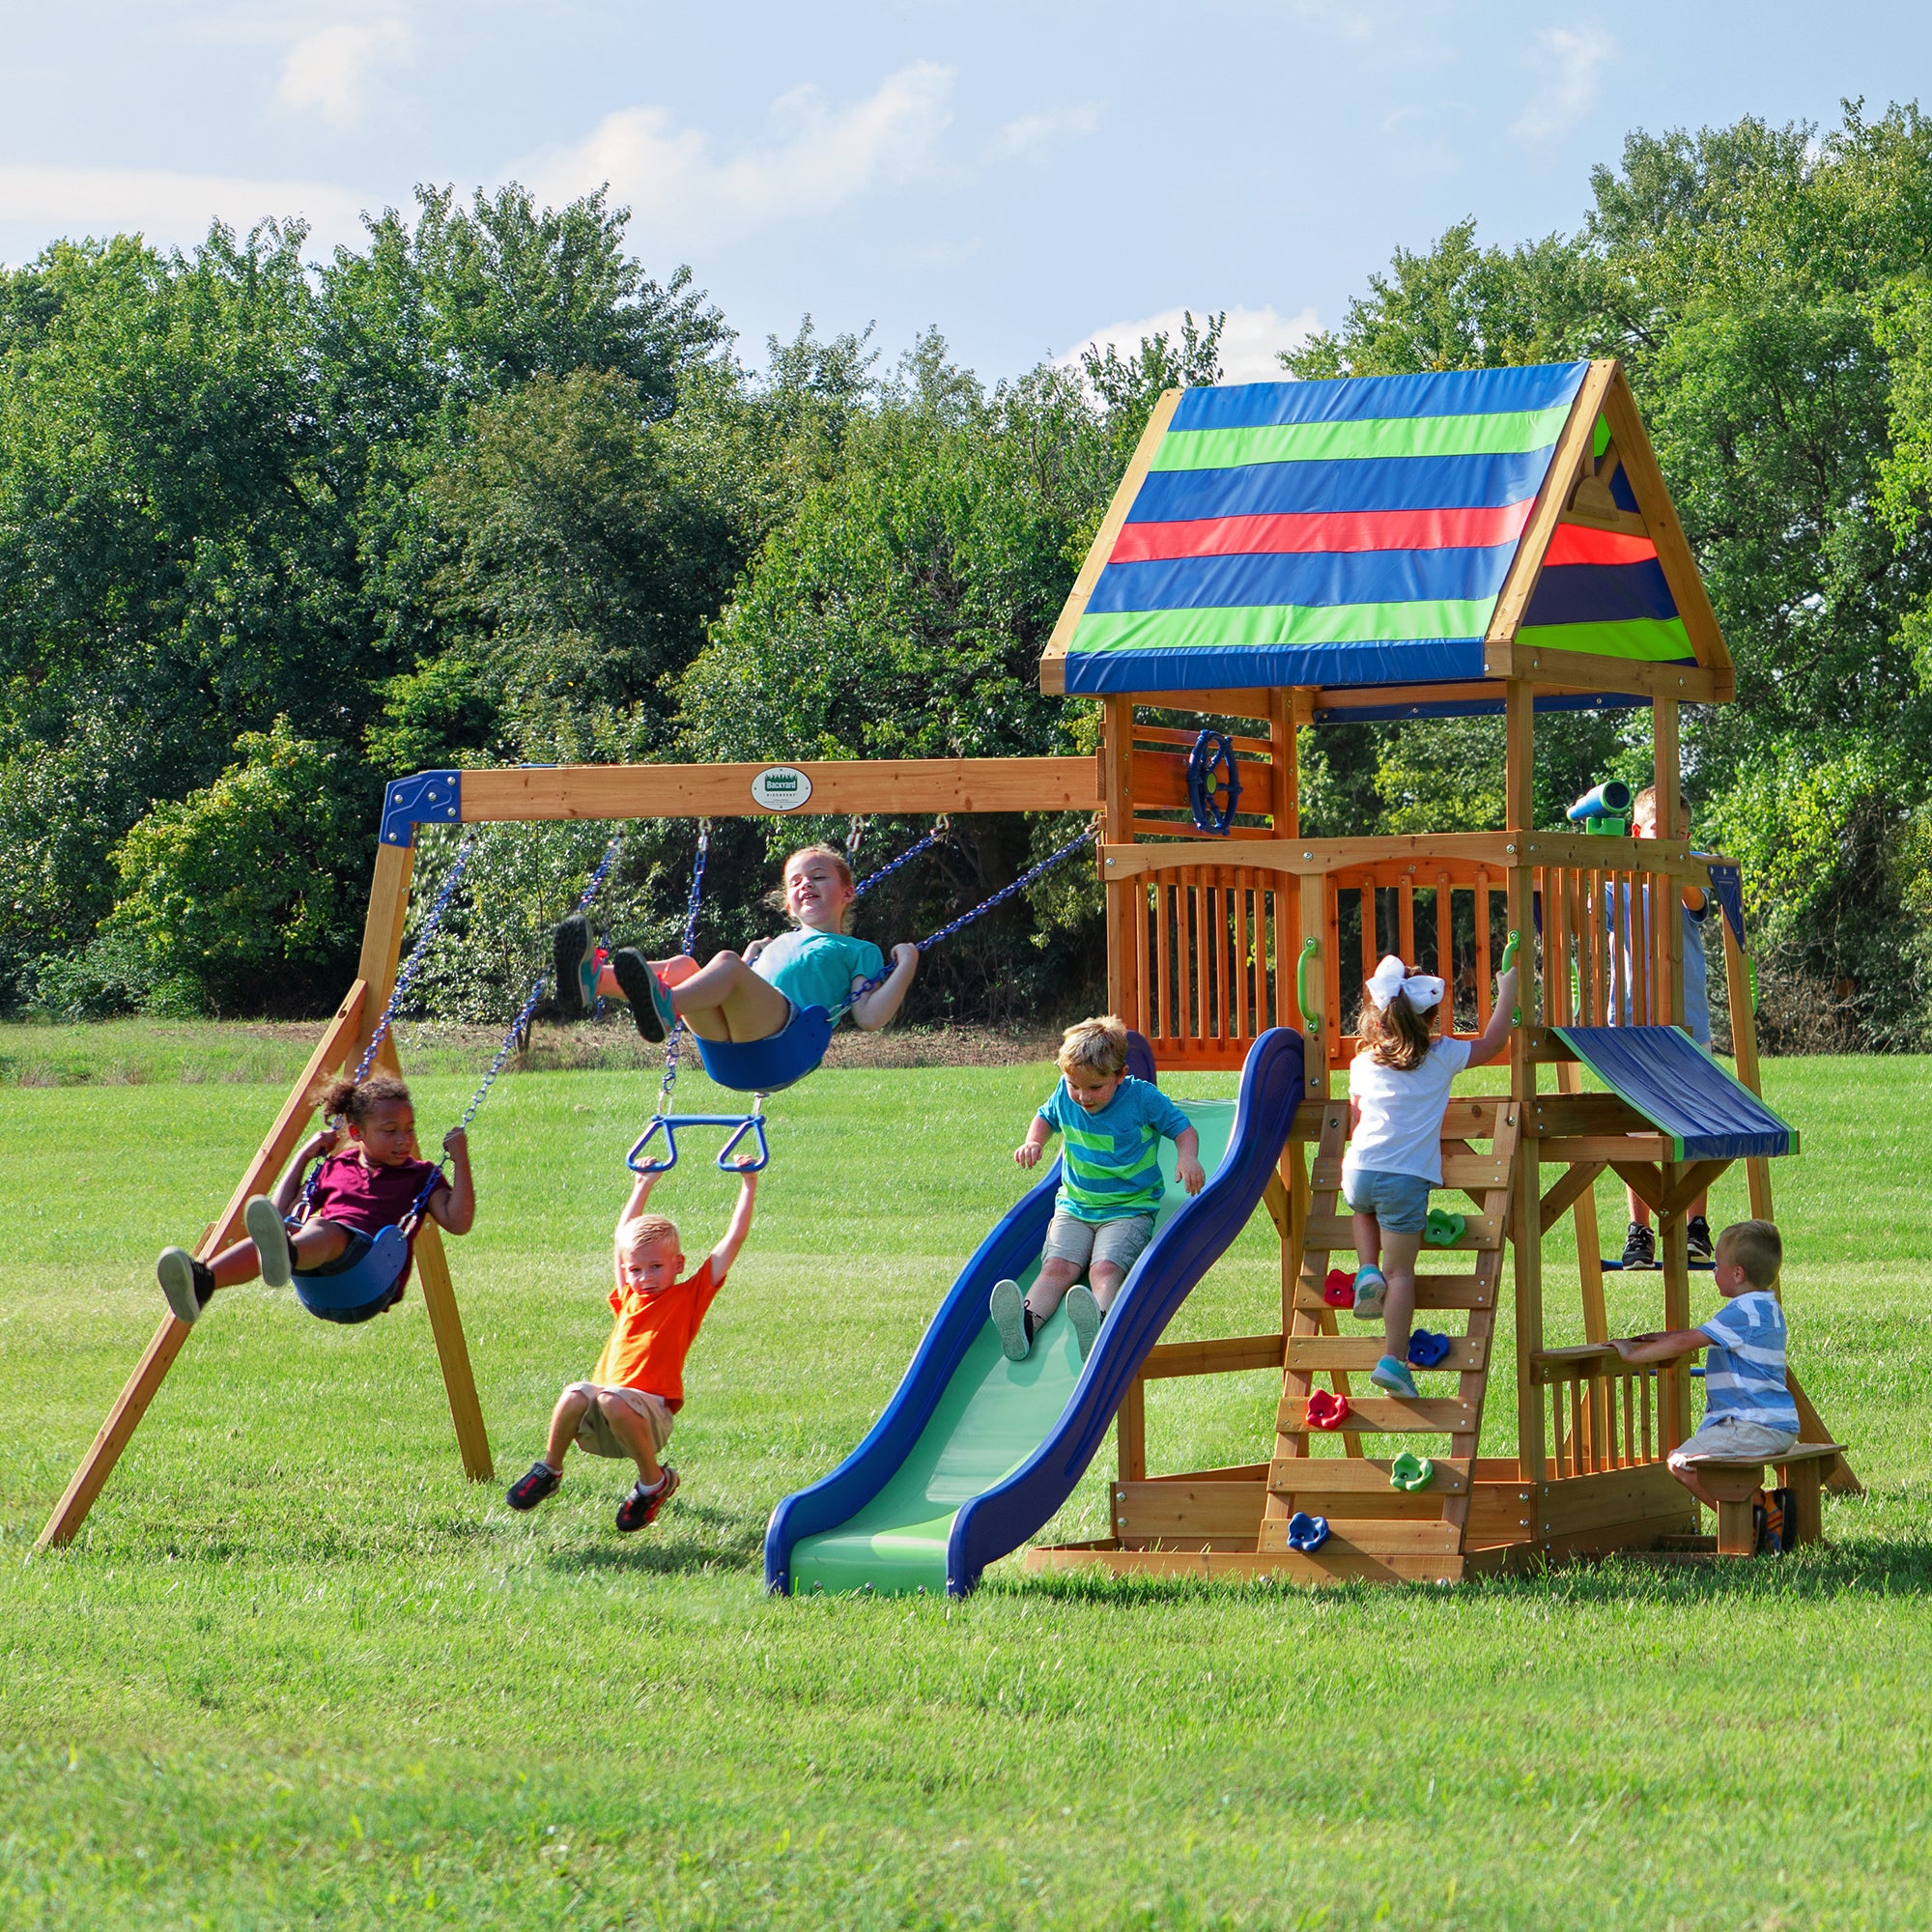 Backyard Swing Sets for Sale - Best Outdoor Playsets - Made in USA